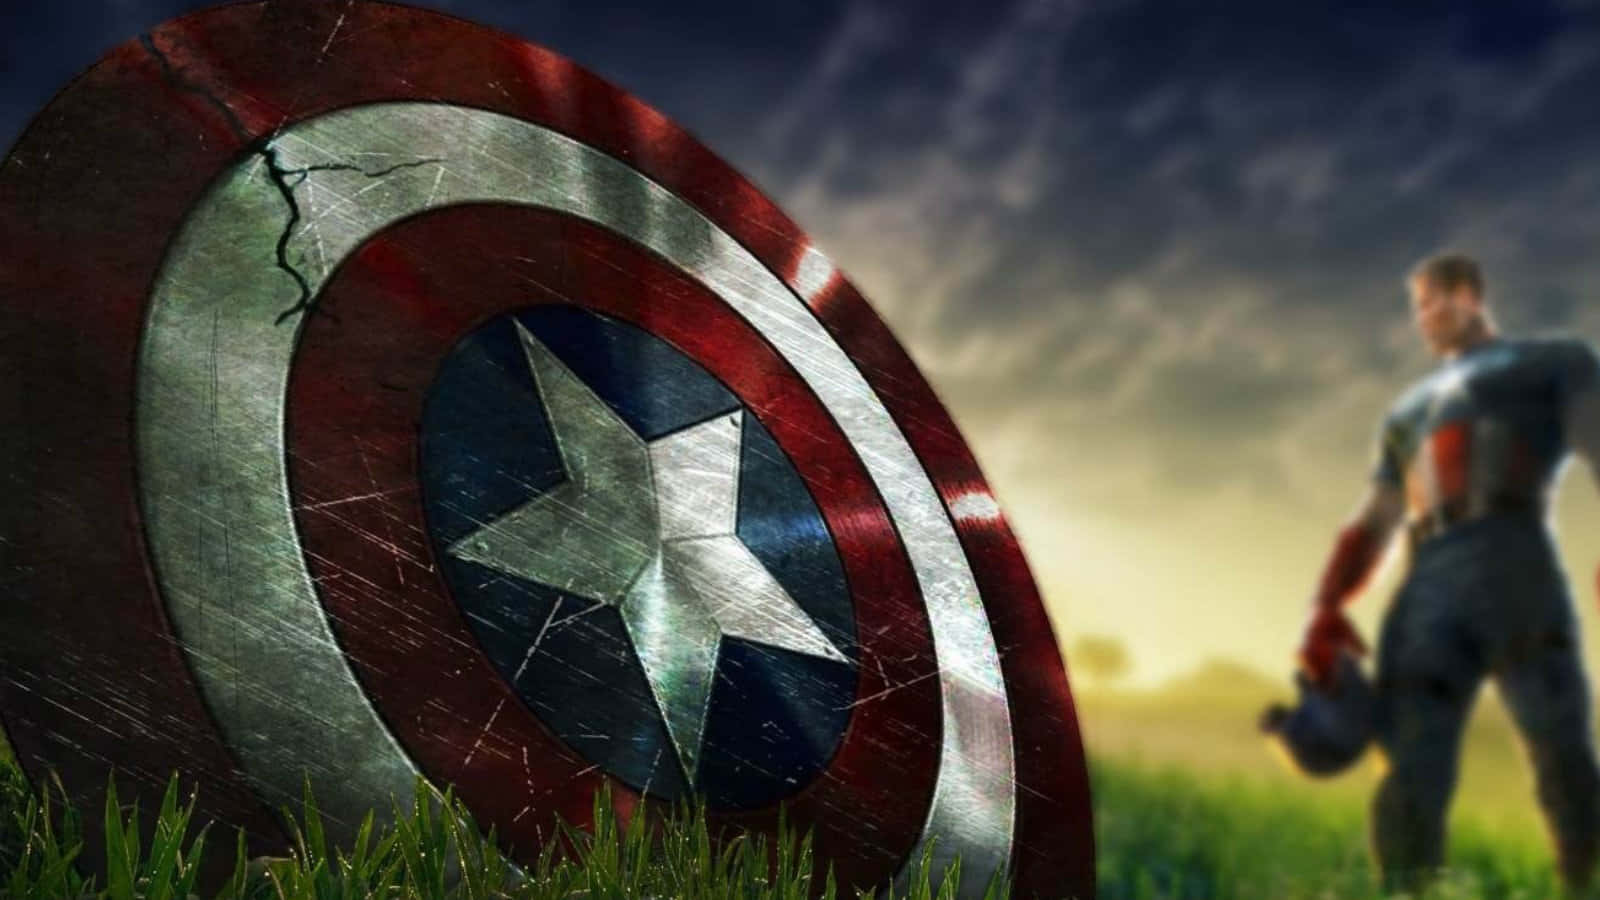 "Be Cool and Brave like Captain America" Wallpaper